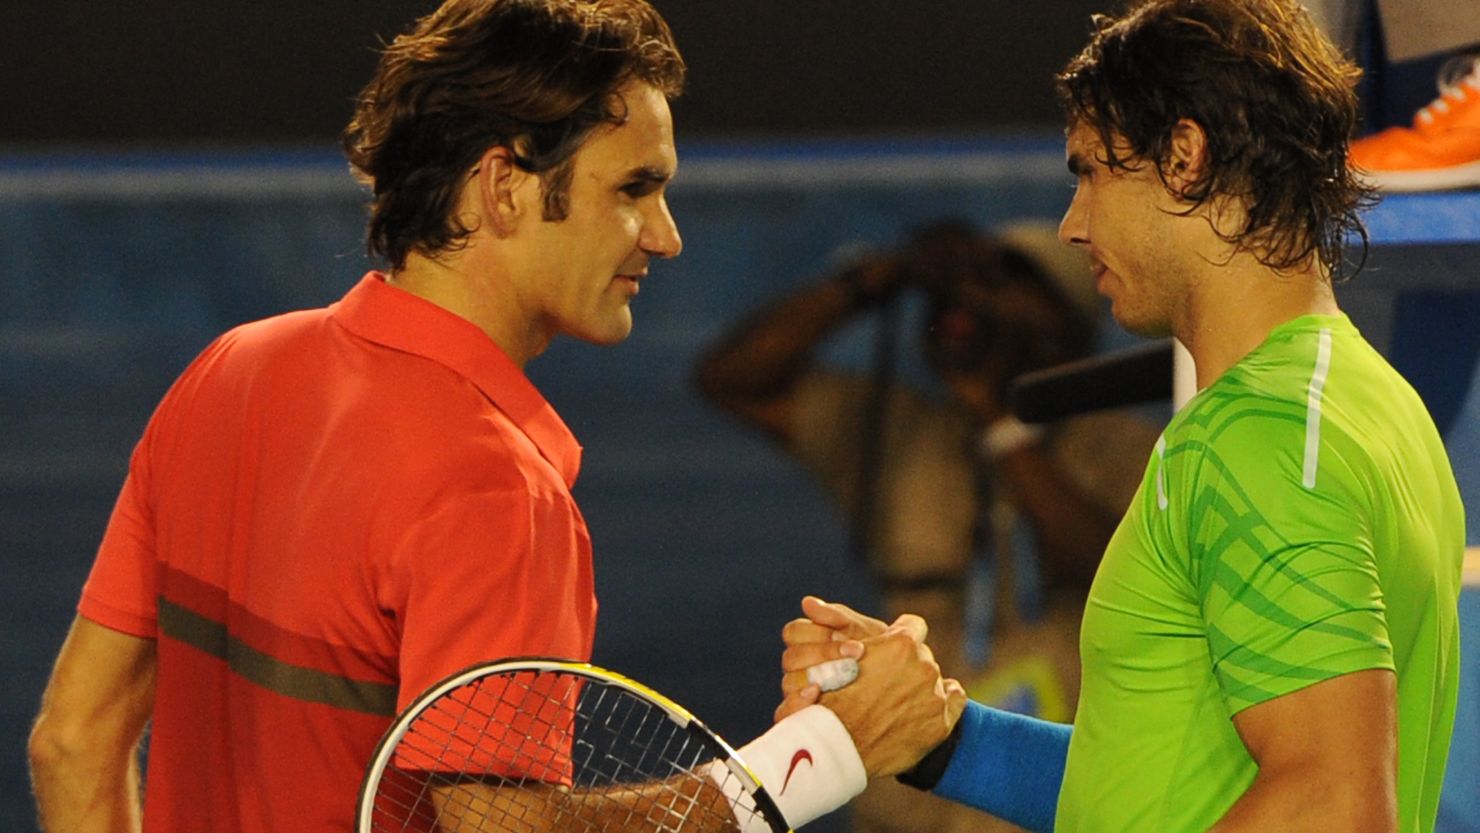 Rafael Nadal beat Roger Federer in their most recent encounter, the semifinals of the Australian Open in January.